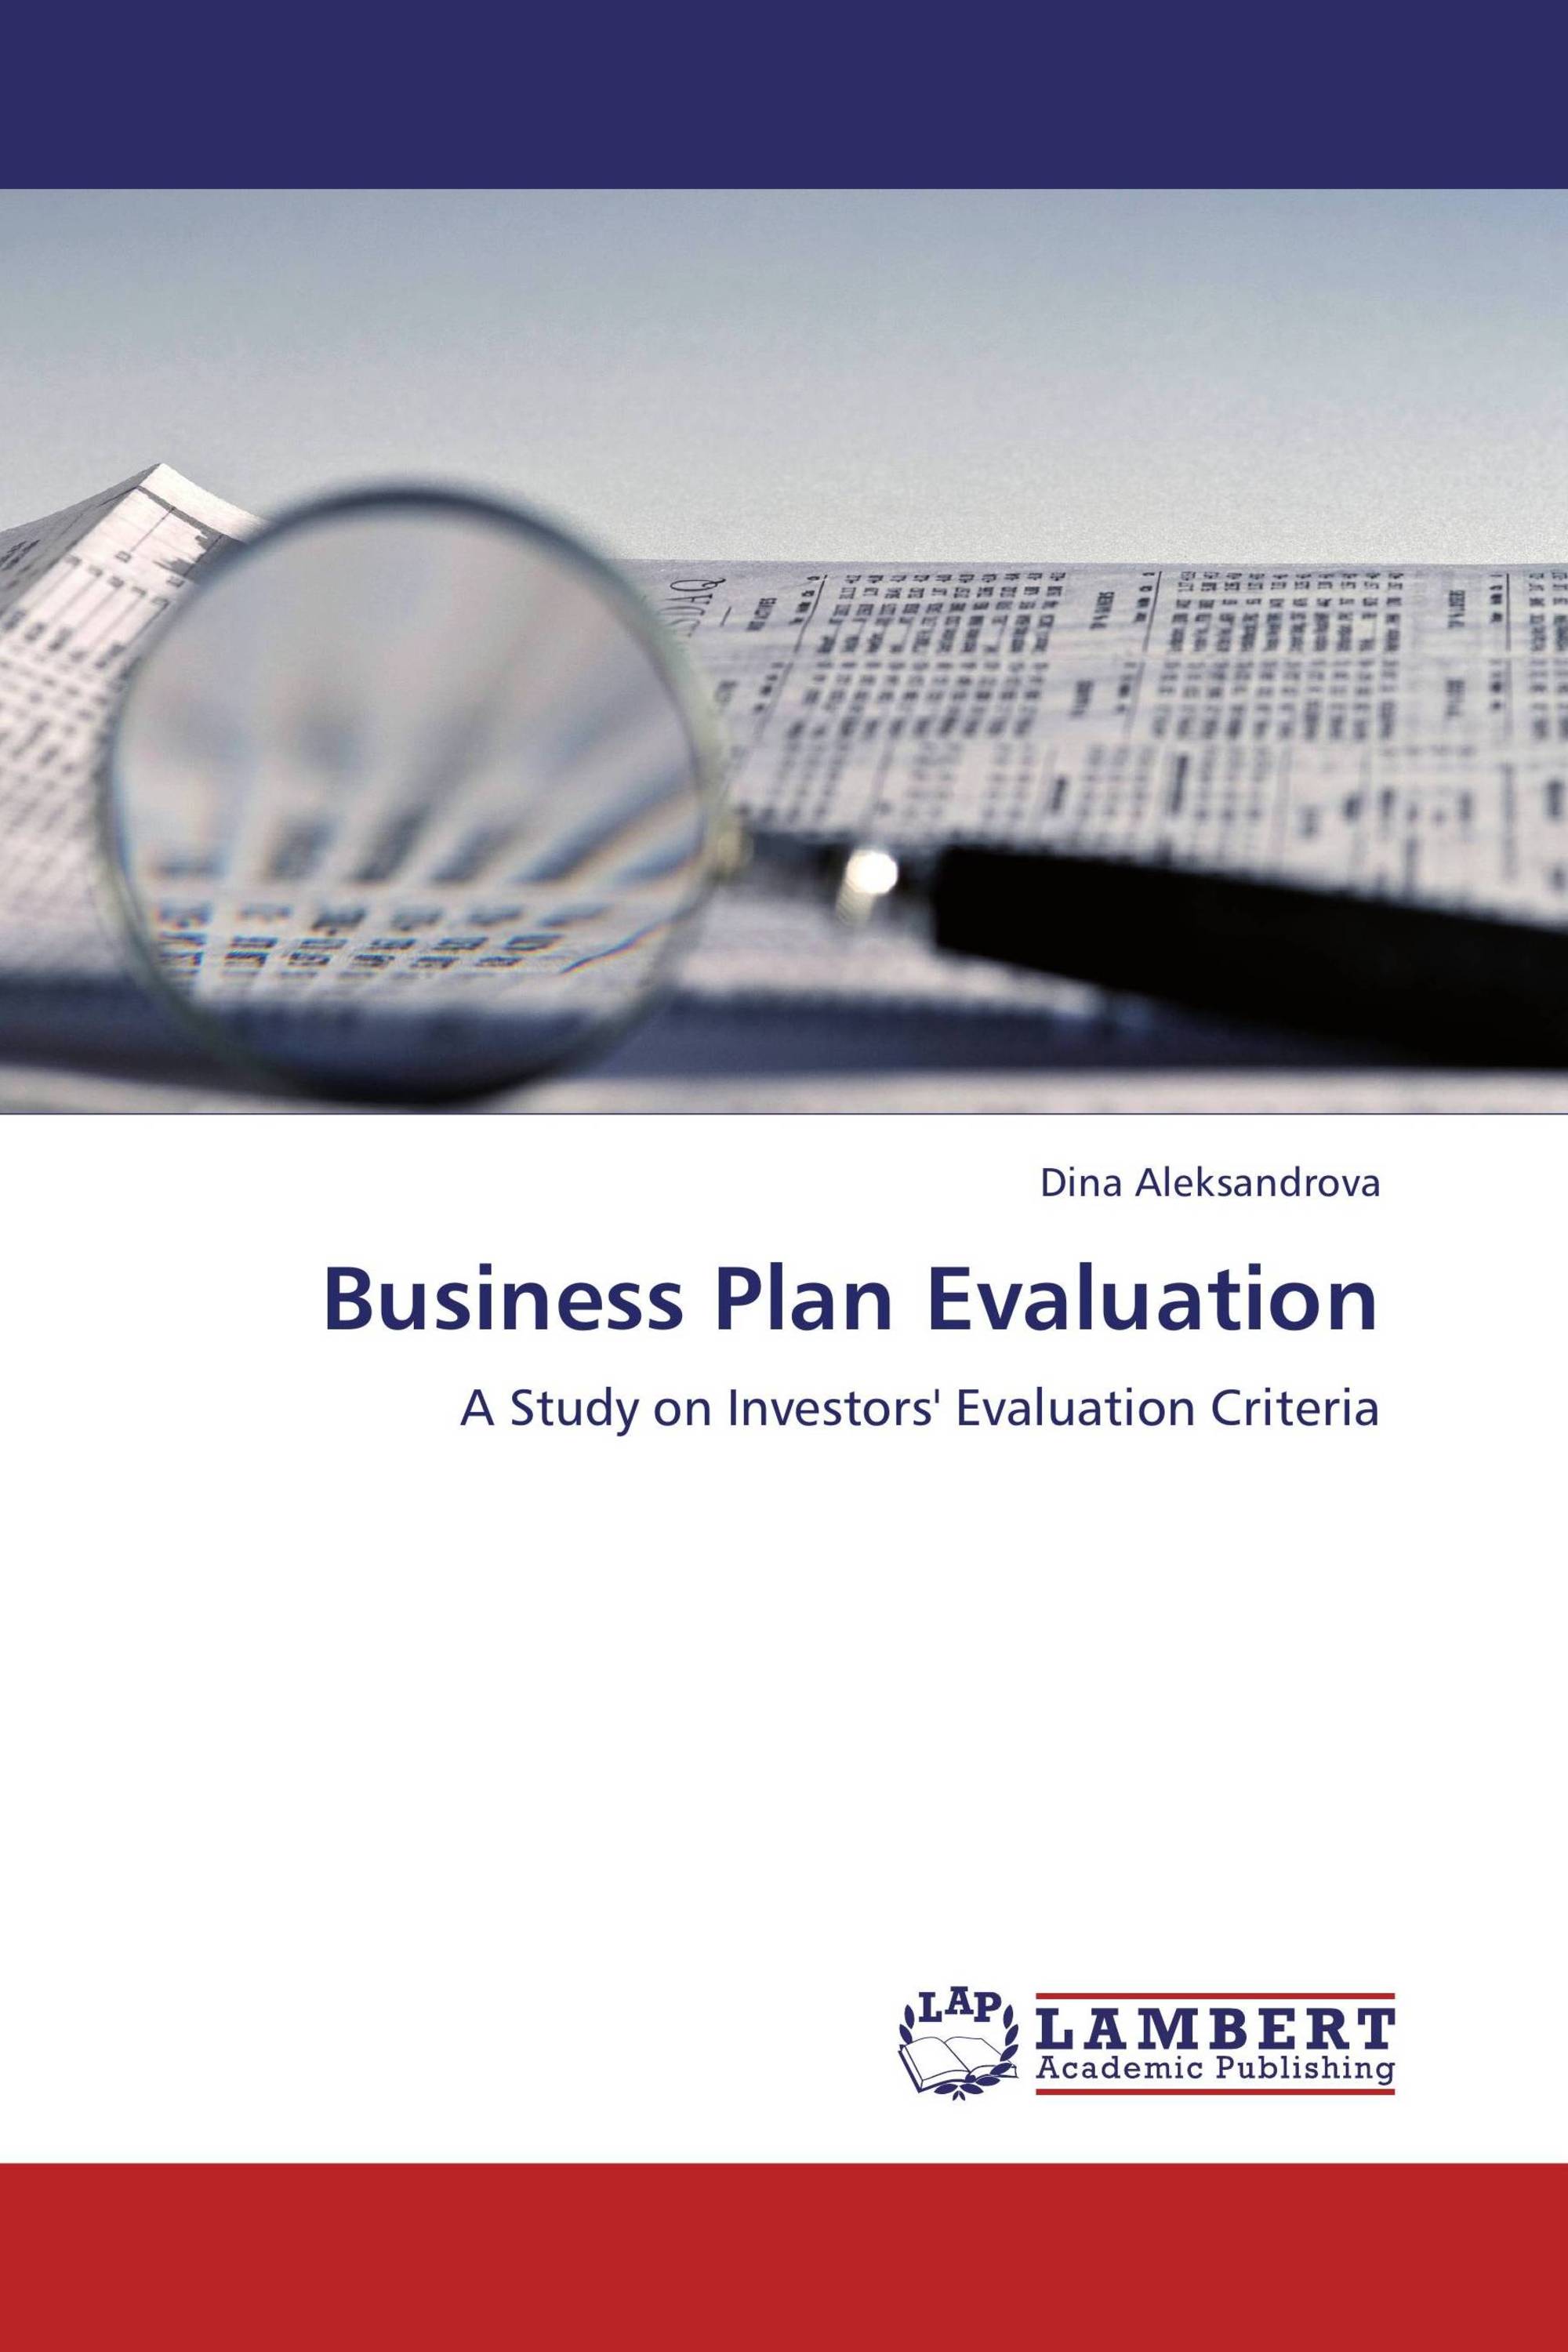 the business plan requires constant evaluation by